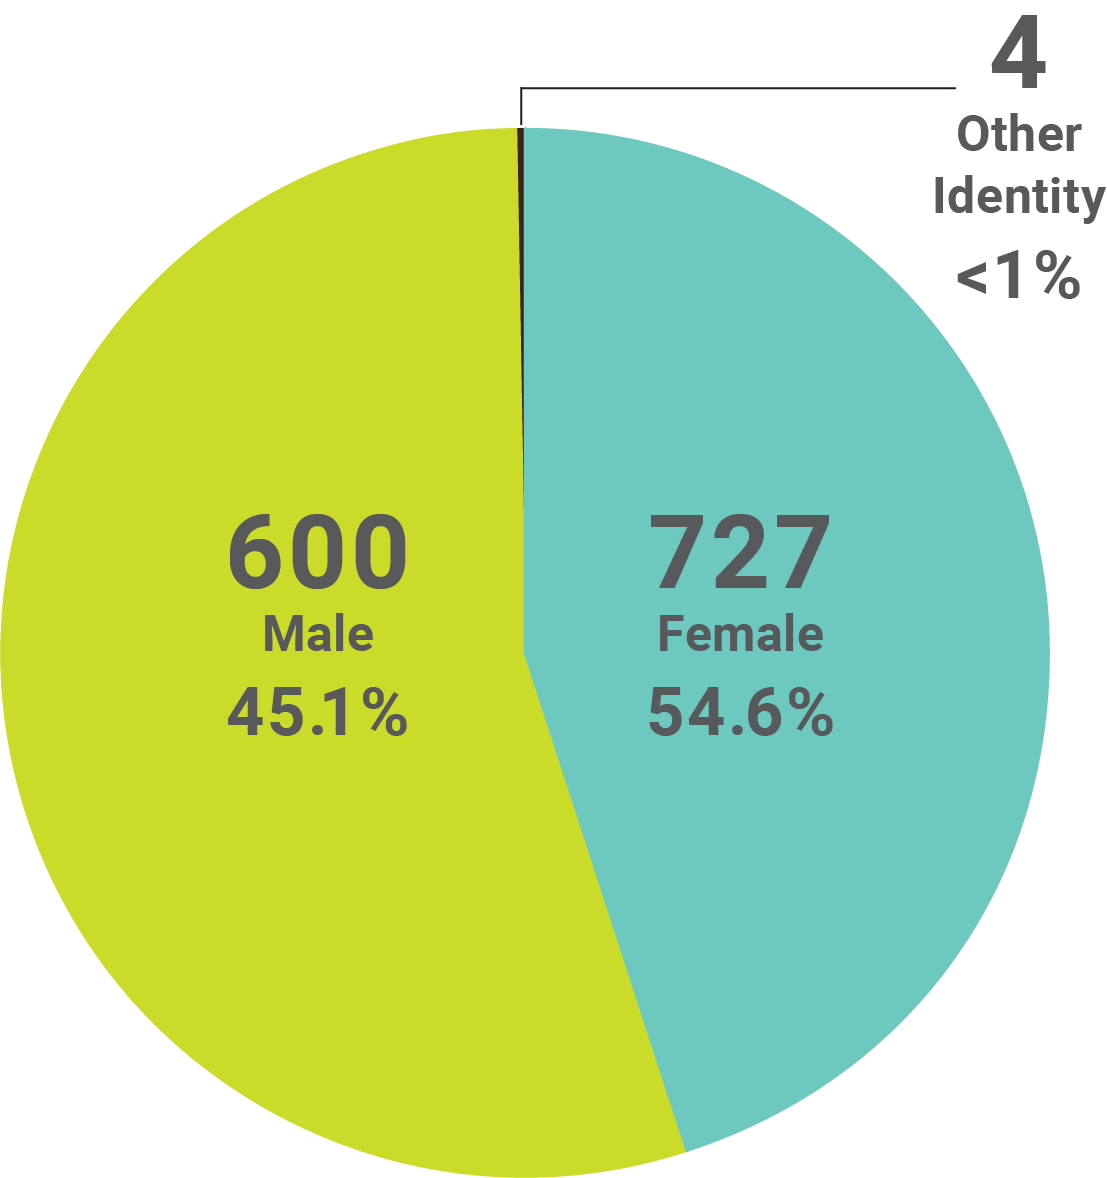 Graphic showing the demographics of faculty by Gender Identity. Male with 600 at 45.1%, Female with 727 at 54.6%, and Other Identity with 4 at less than 1%. 